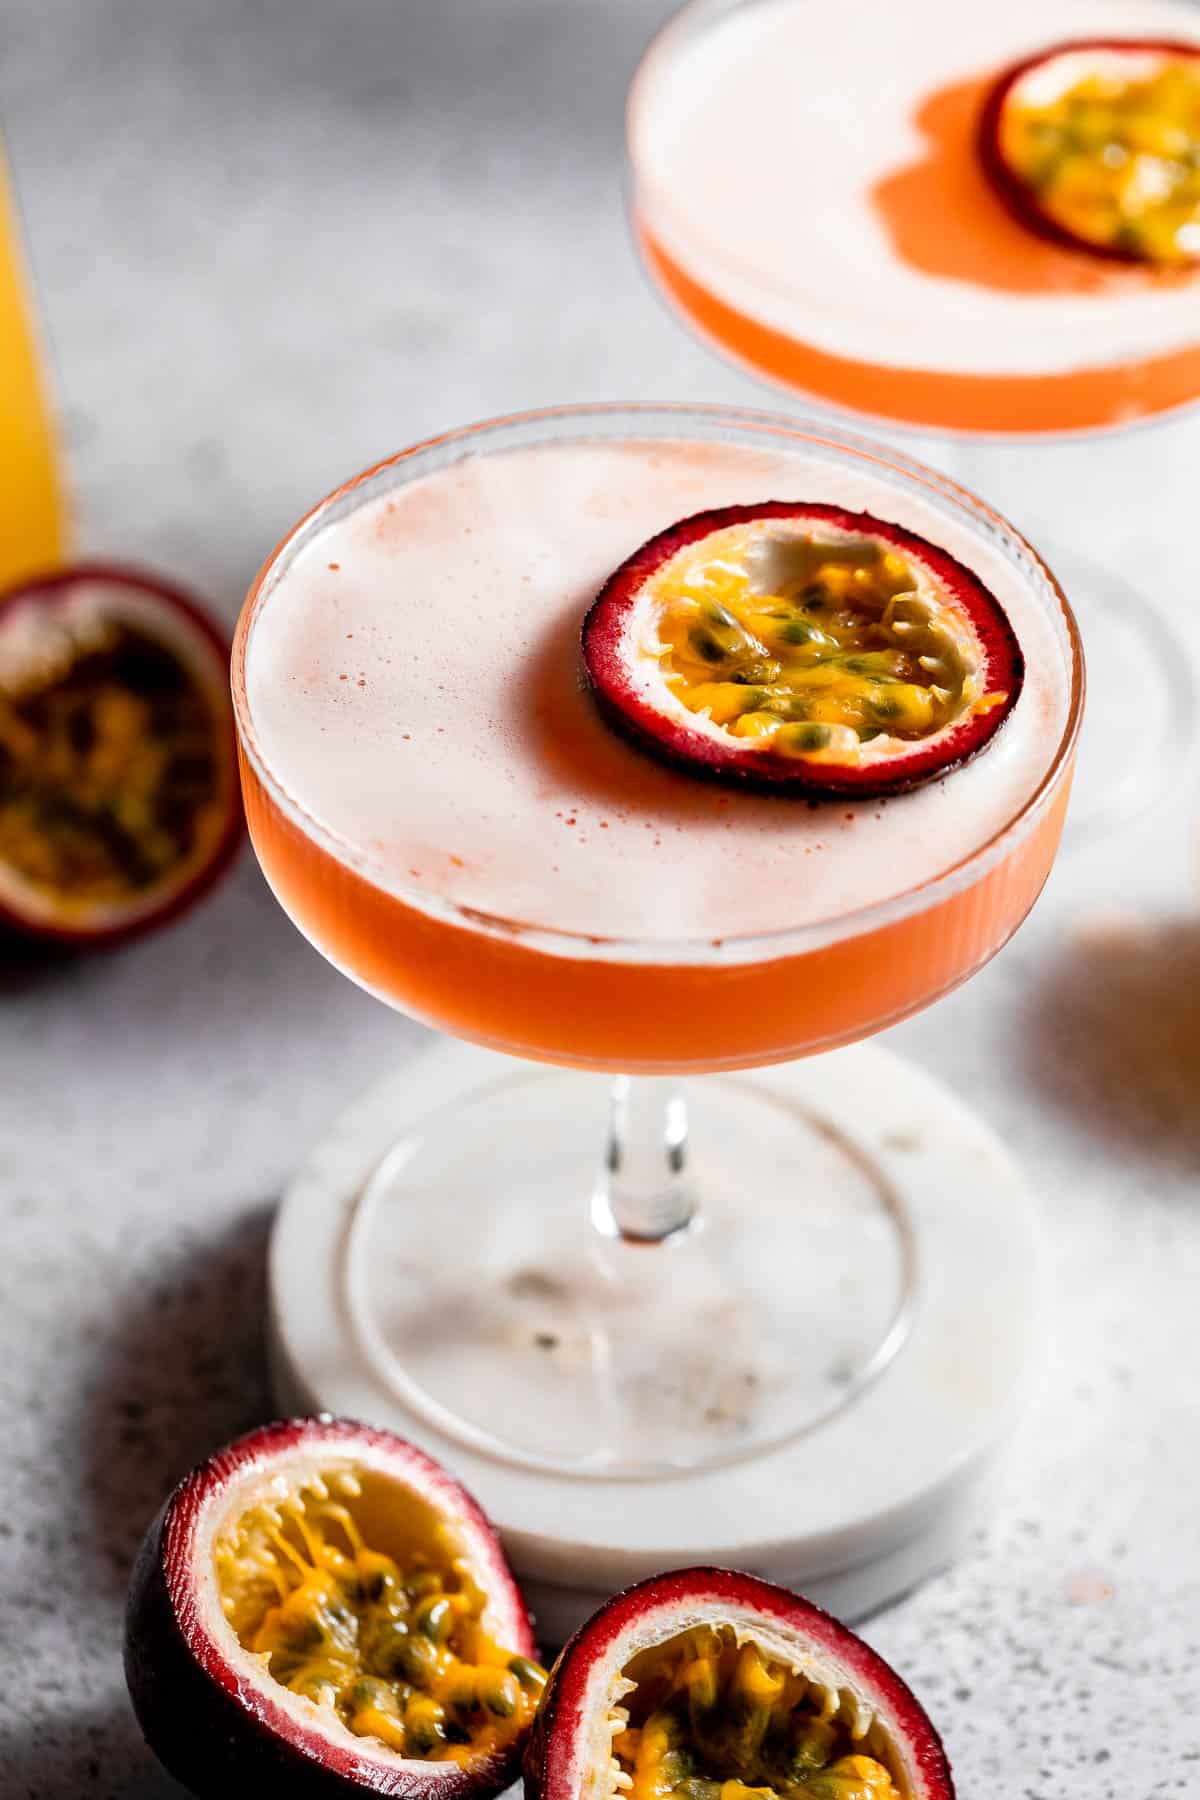 pornstar martini's topped with halved passionfruit